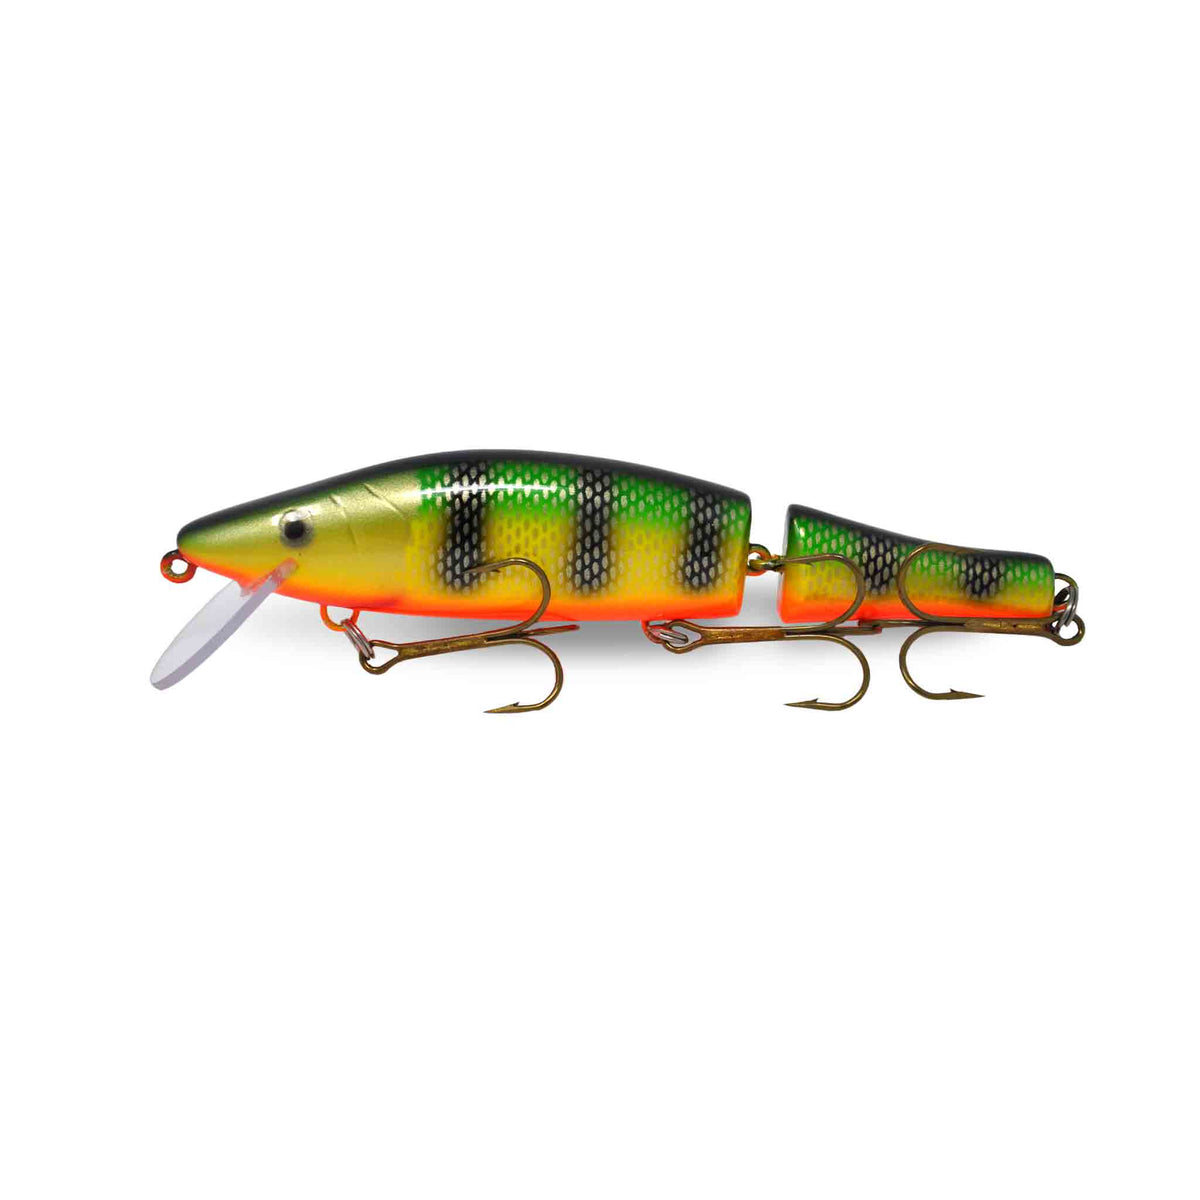 View of Crankbaits Legend lures Outcast Crankbait Perch / Orange Belly available at EZOKO Pike and Musky Shop